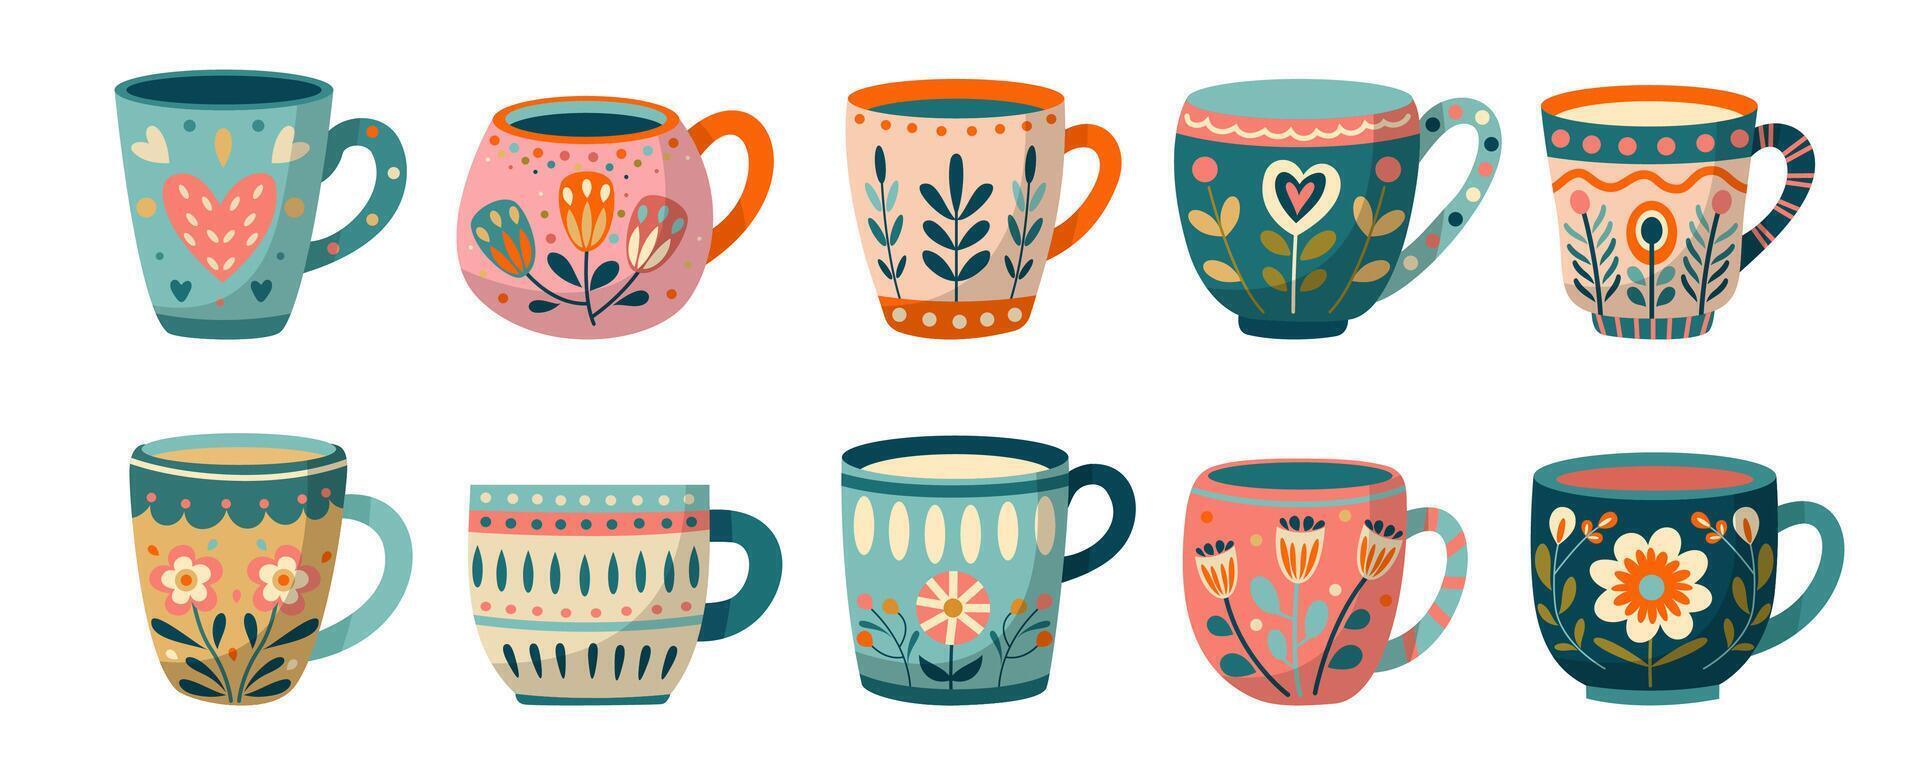 Set of mugs with abstract floral design vector